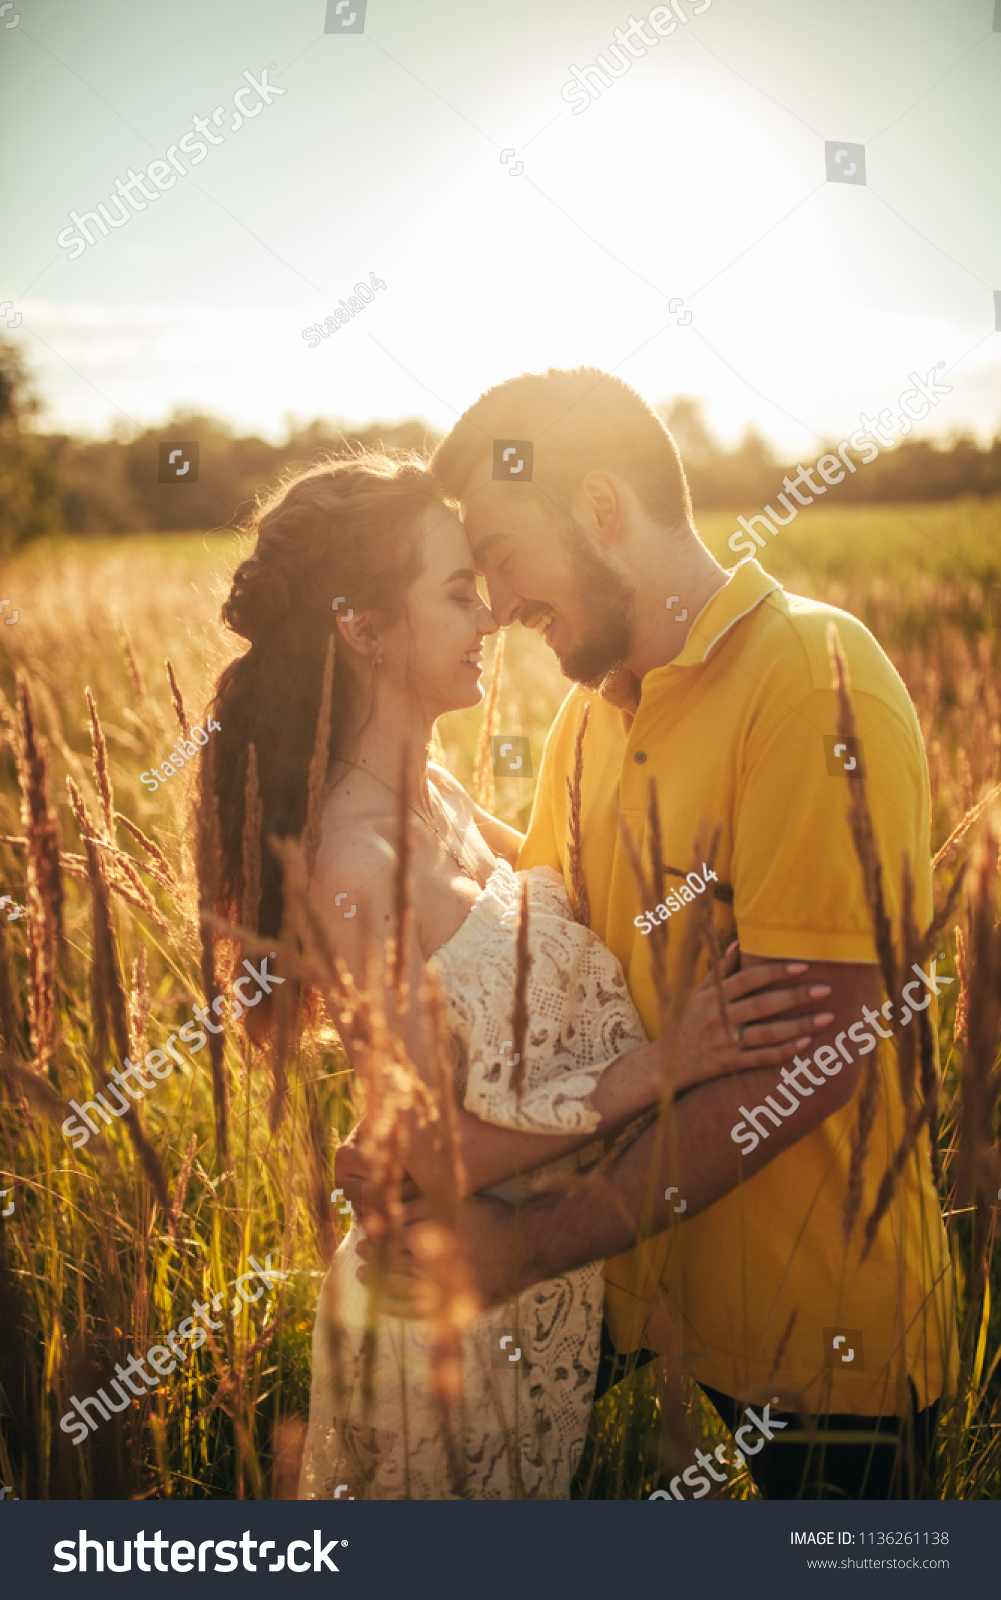 Young enamored couple smiles and hugs at meadow against background of grass and spikes. Backlit. #1136261138